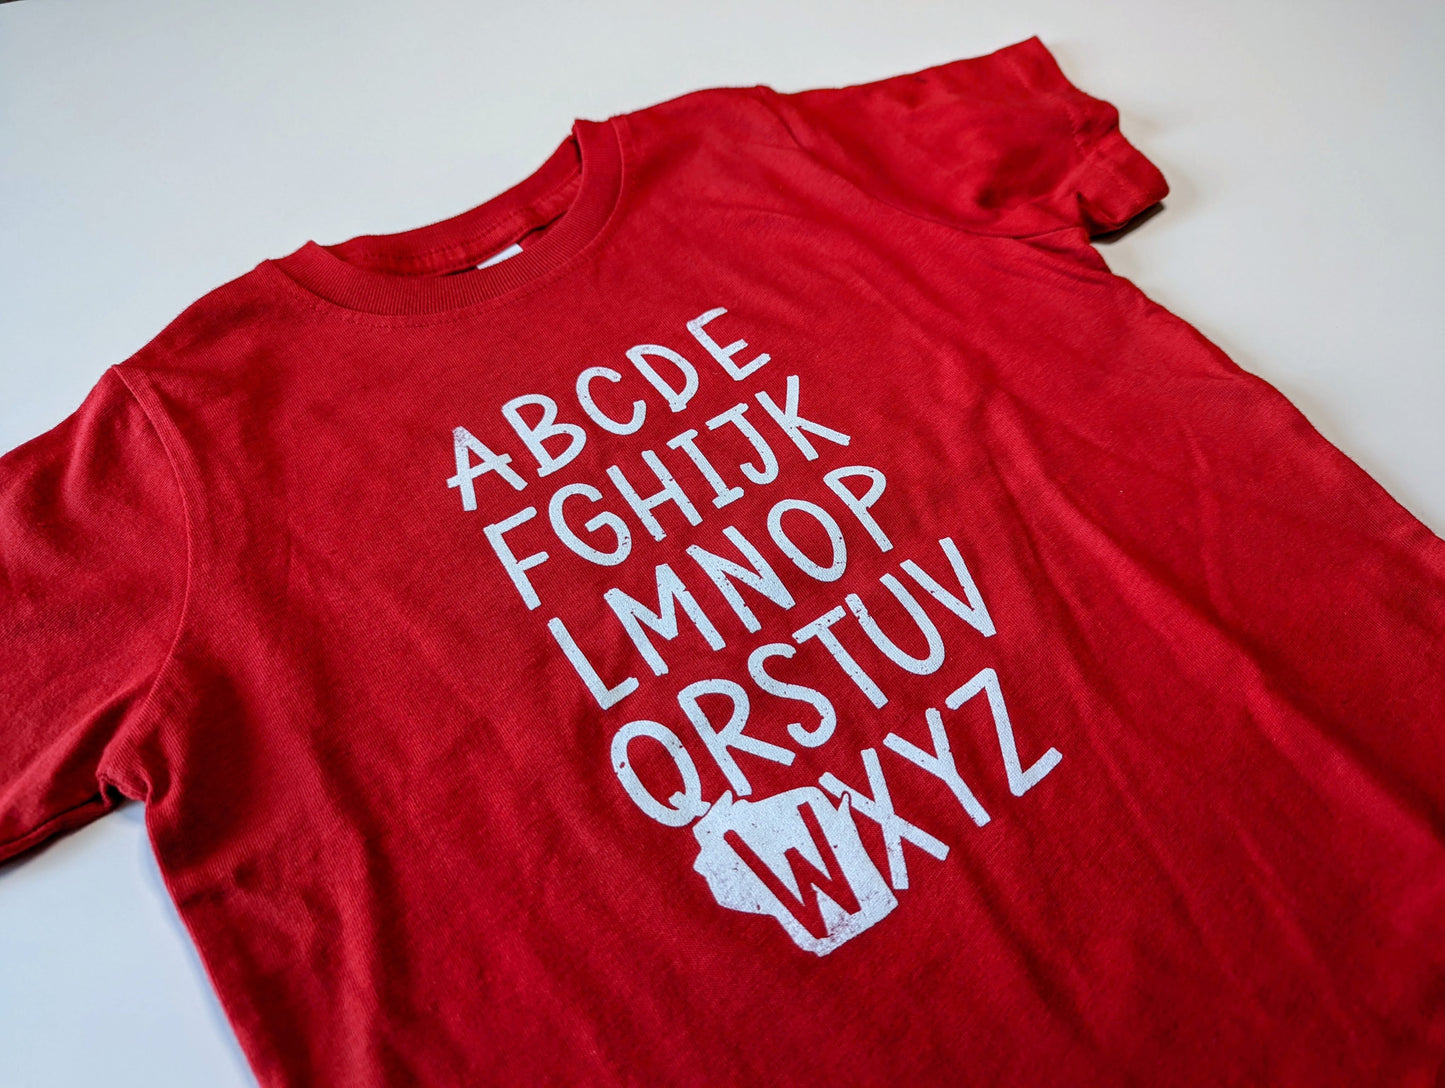 Wisconsin A to Z - WI Travel for Toddlers Screen Printed Shirt